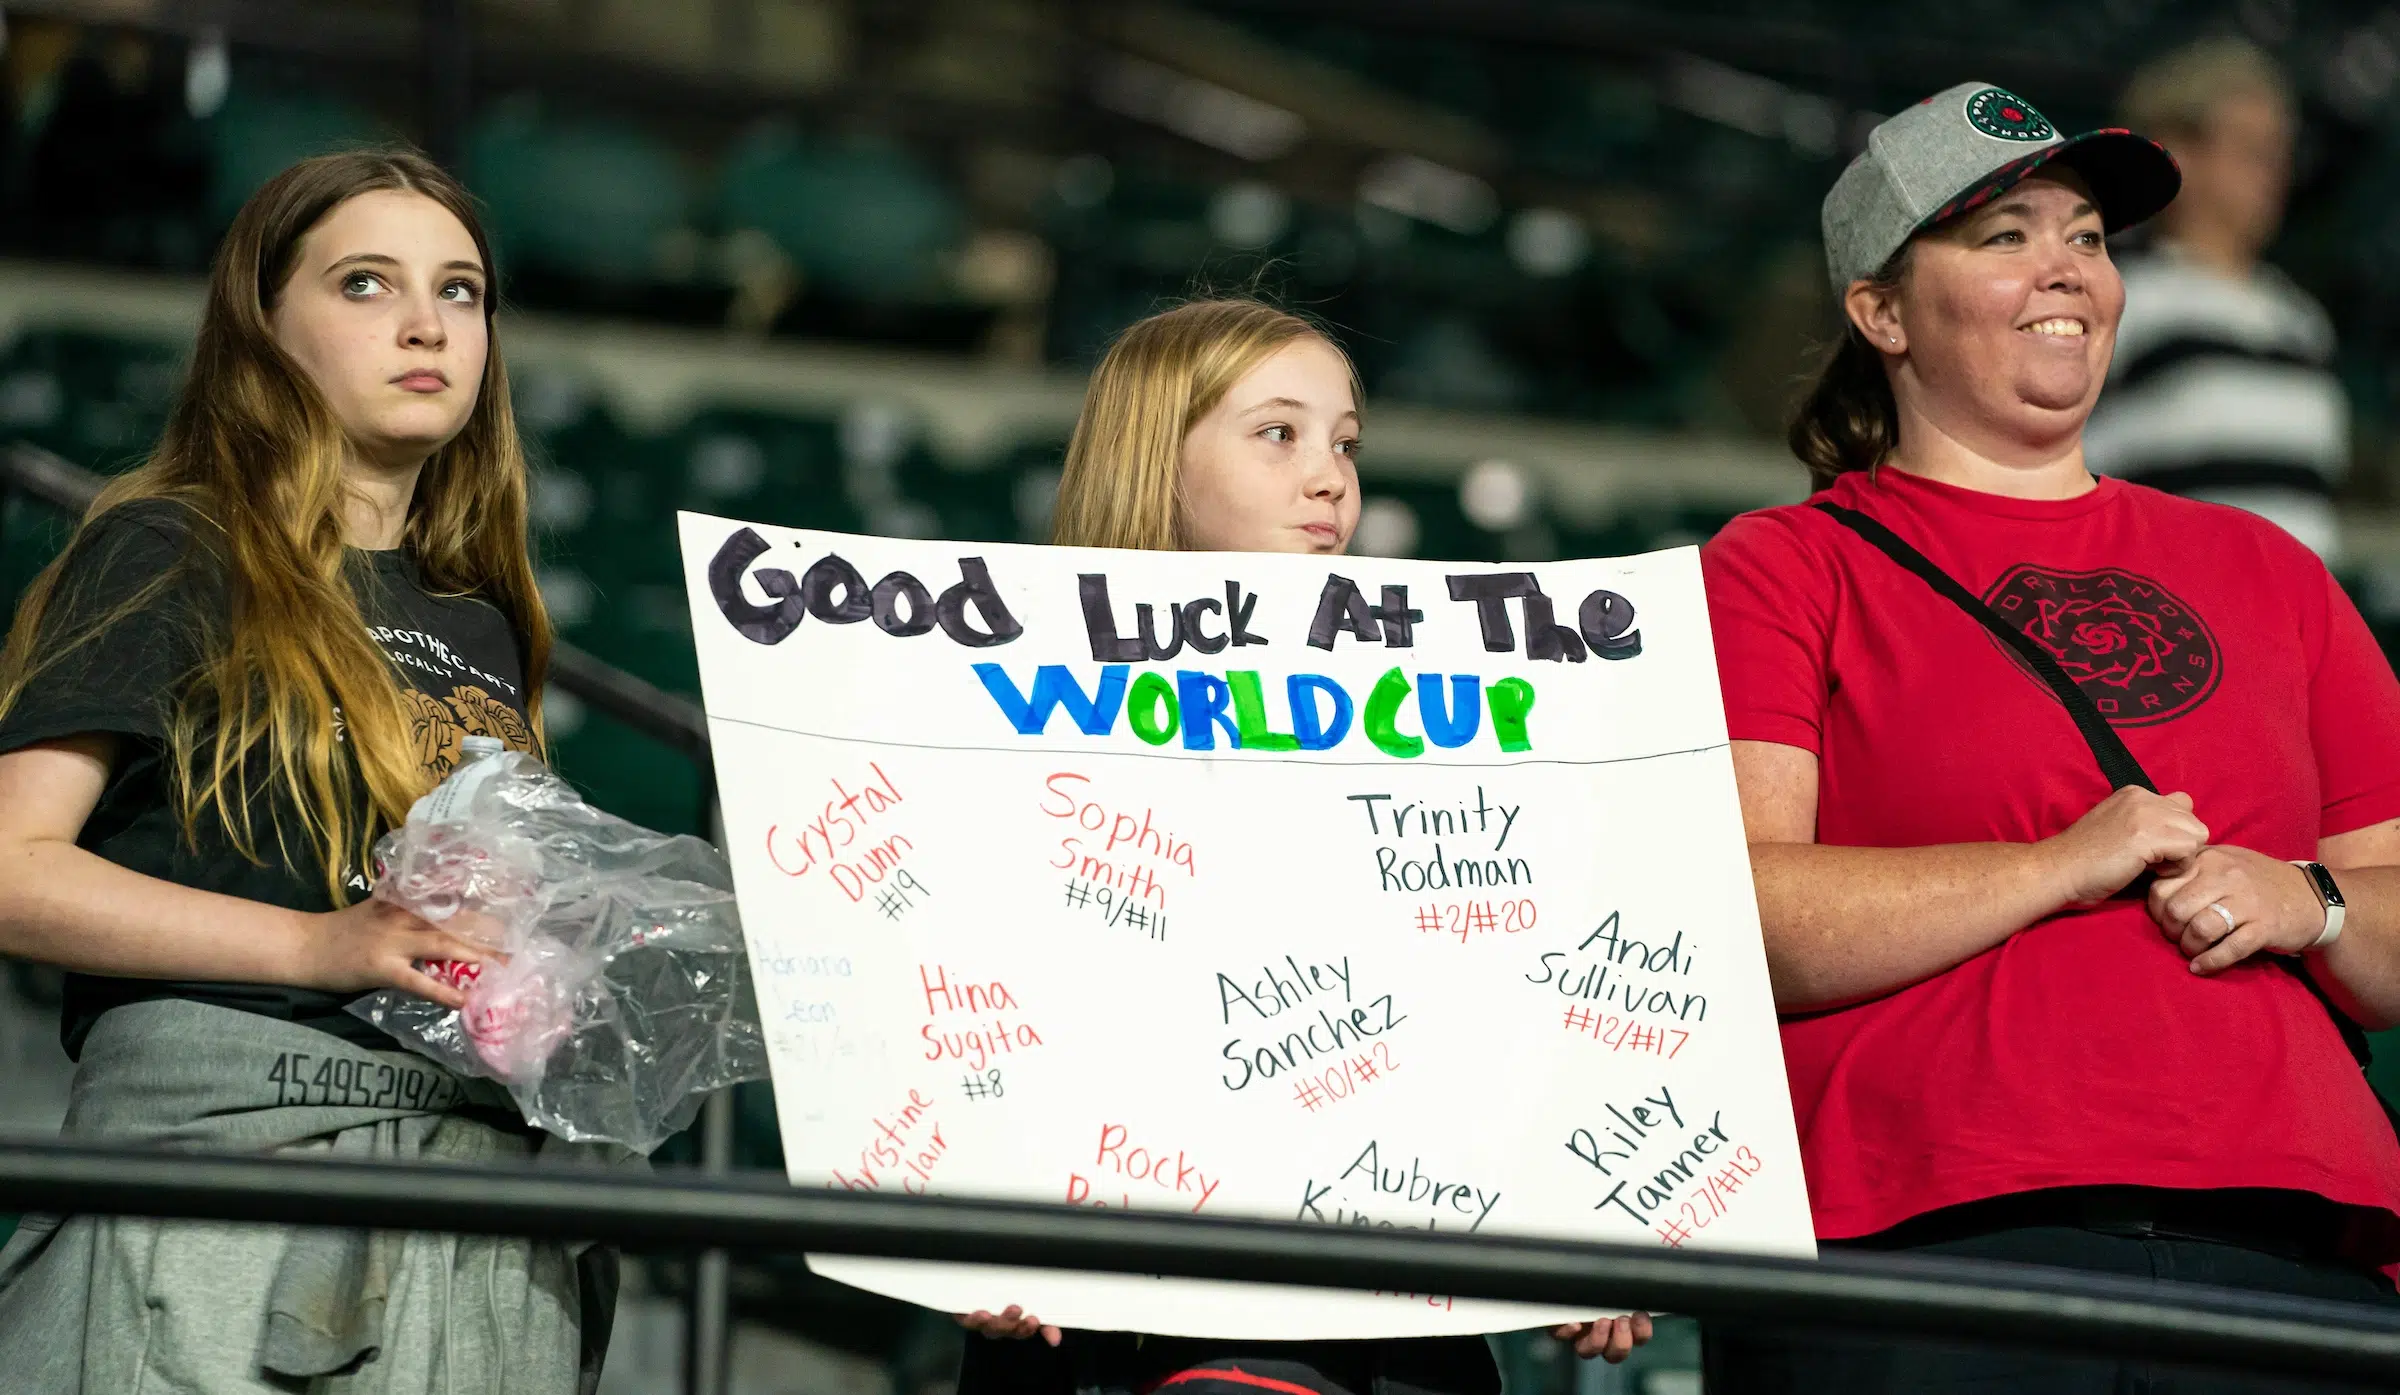 A young fan holds up a handwritten poster that reads "Good luck at the World Cup"